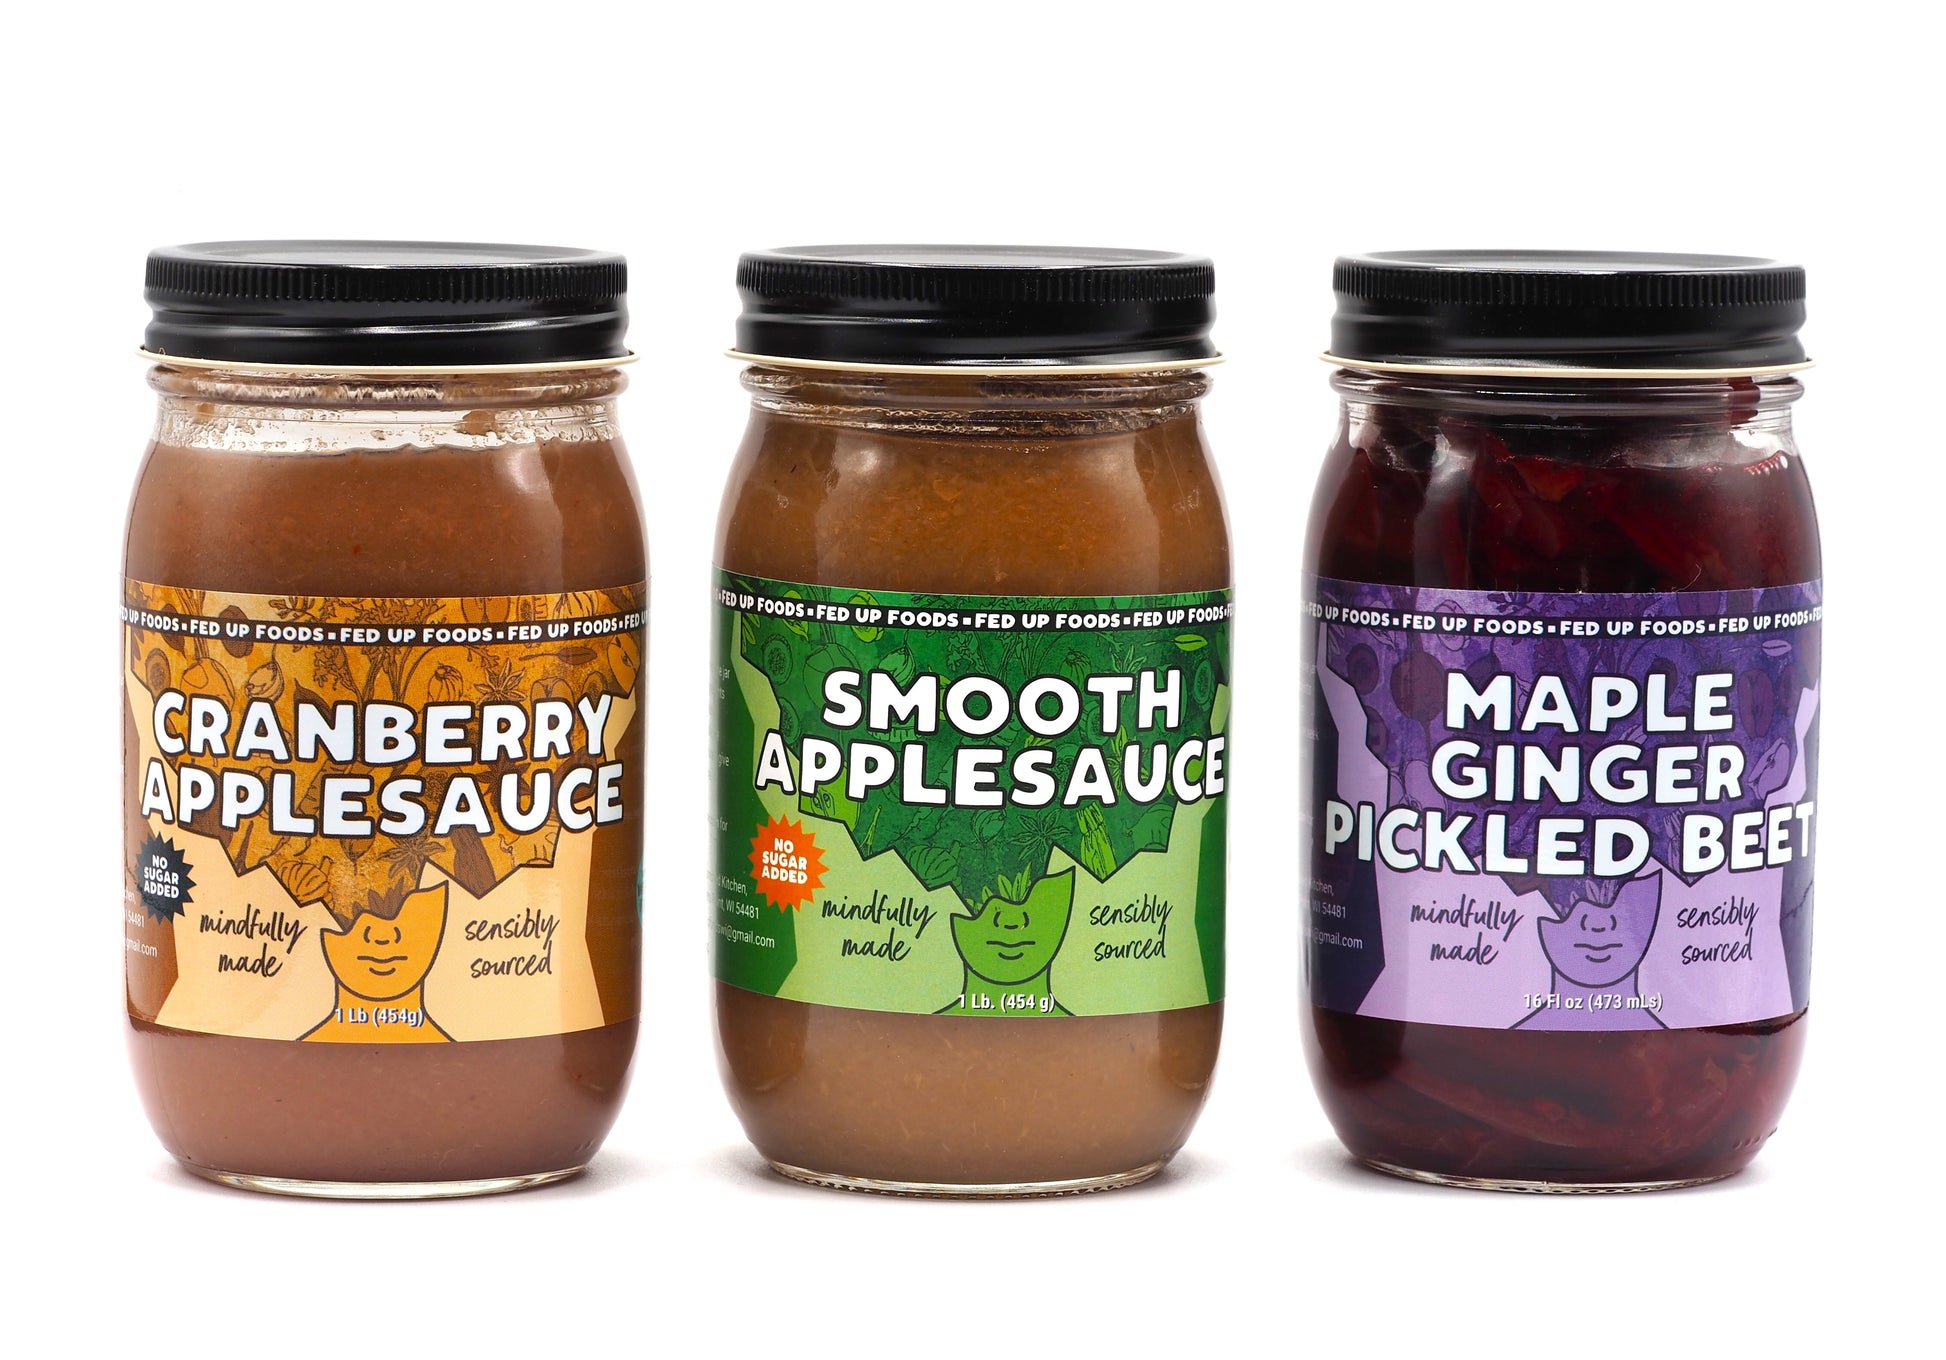 Fed Up Foods Cranberry Applesauce, Smooth Applesauce and Maple Ginger Pickled Beet in a 3 pack variety pack